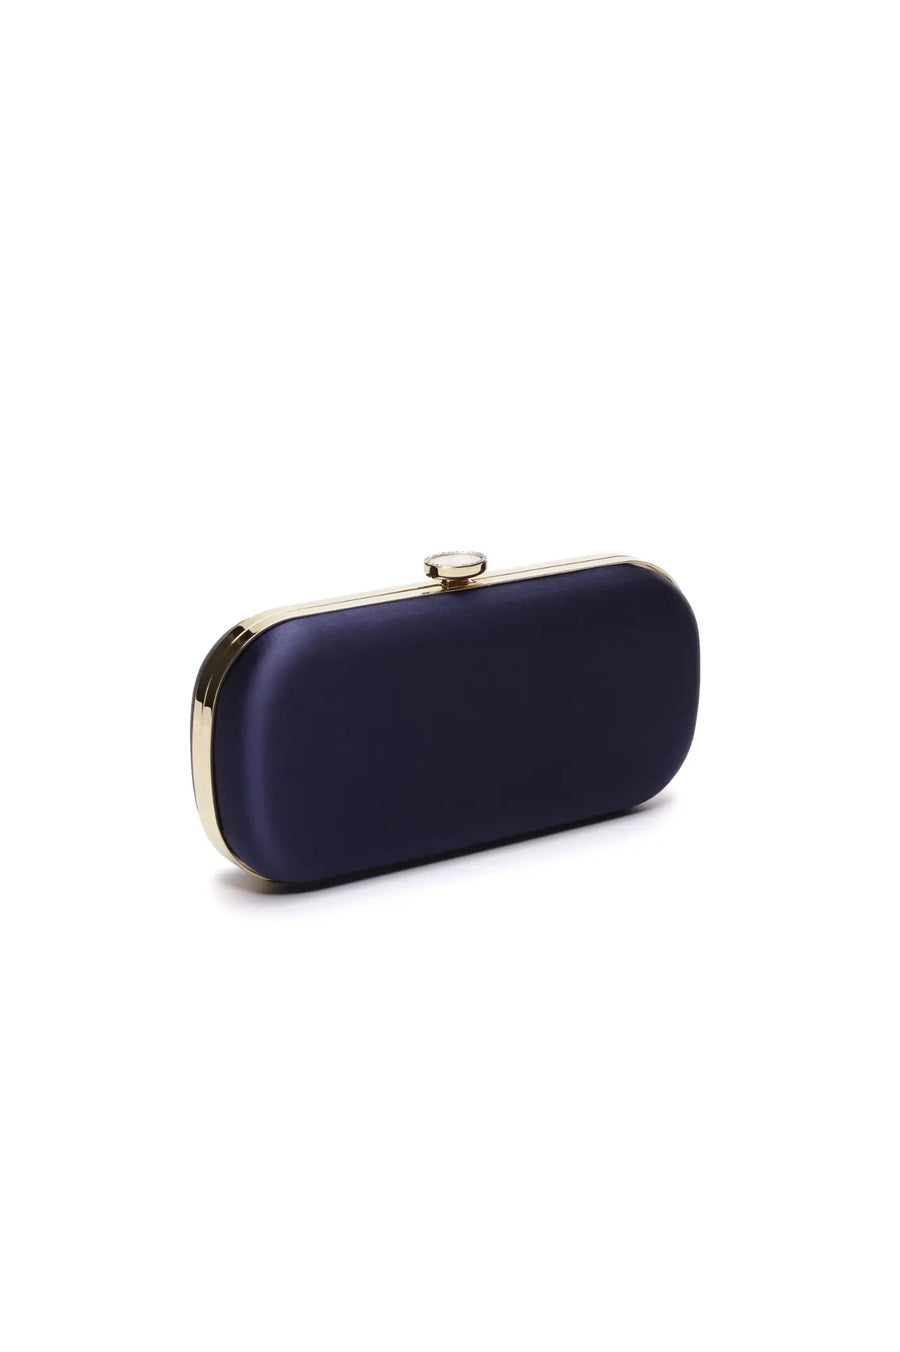 A Navy Blue Satin Bella Clutch from The Bella Rosa Collection with gold-tone hardware against a white background, perfect for an evening wedding.